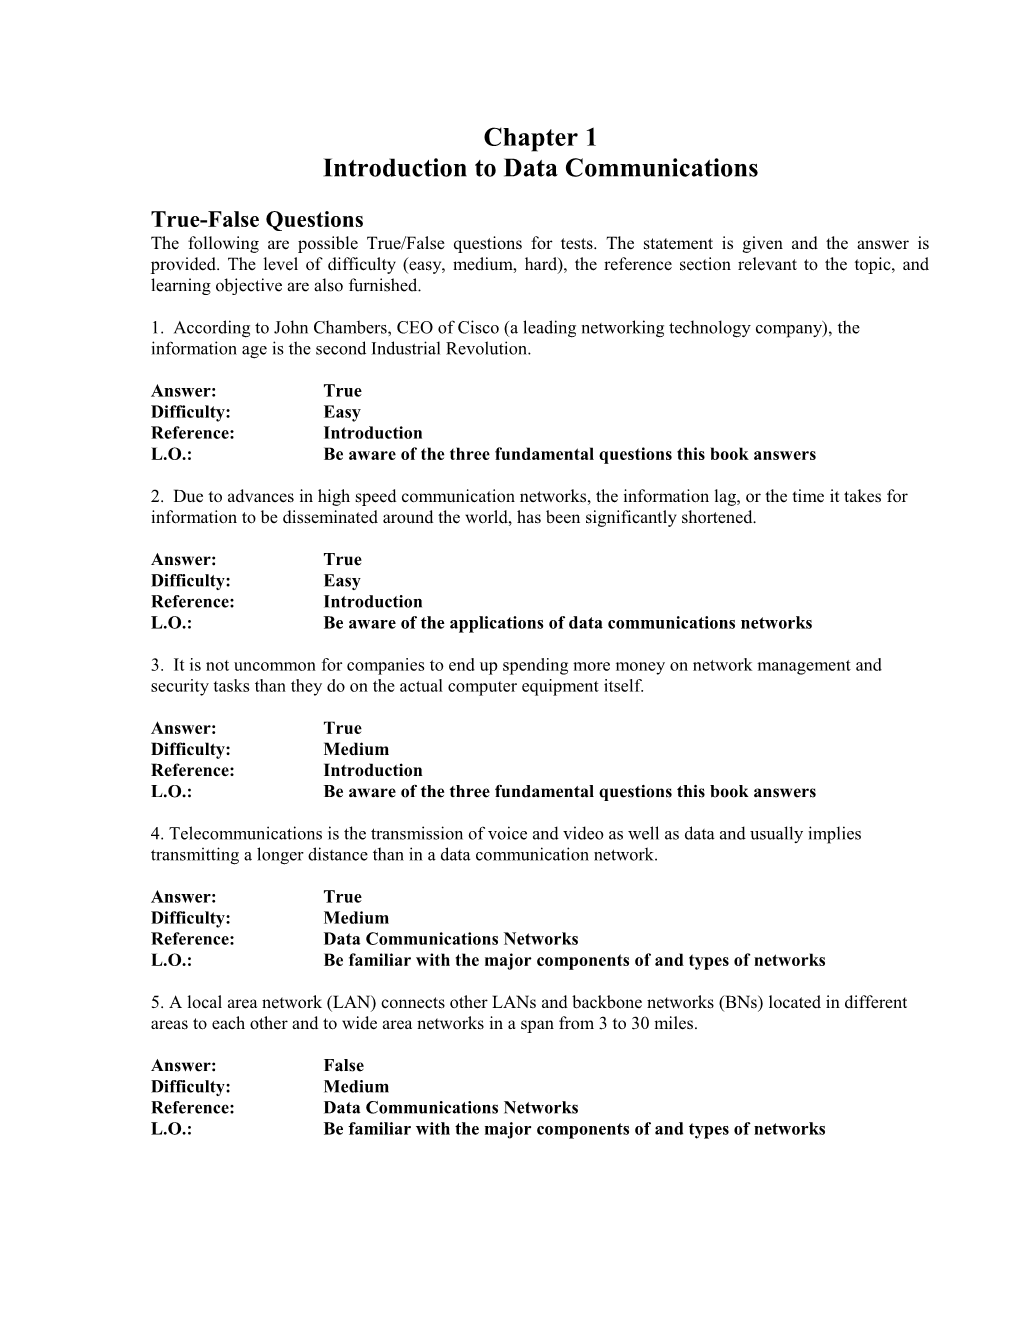 Introduction to Data Communications